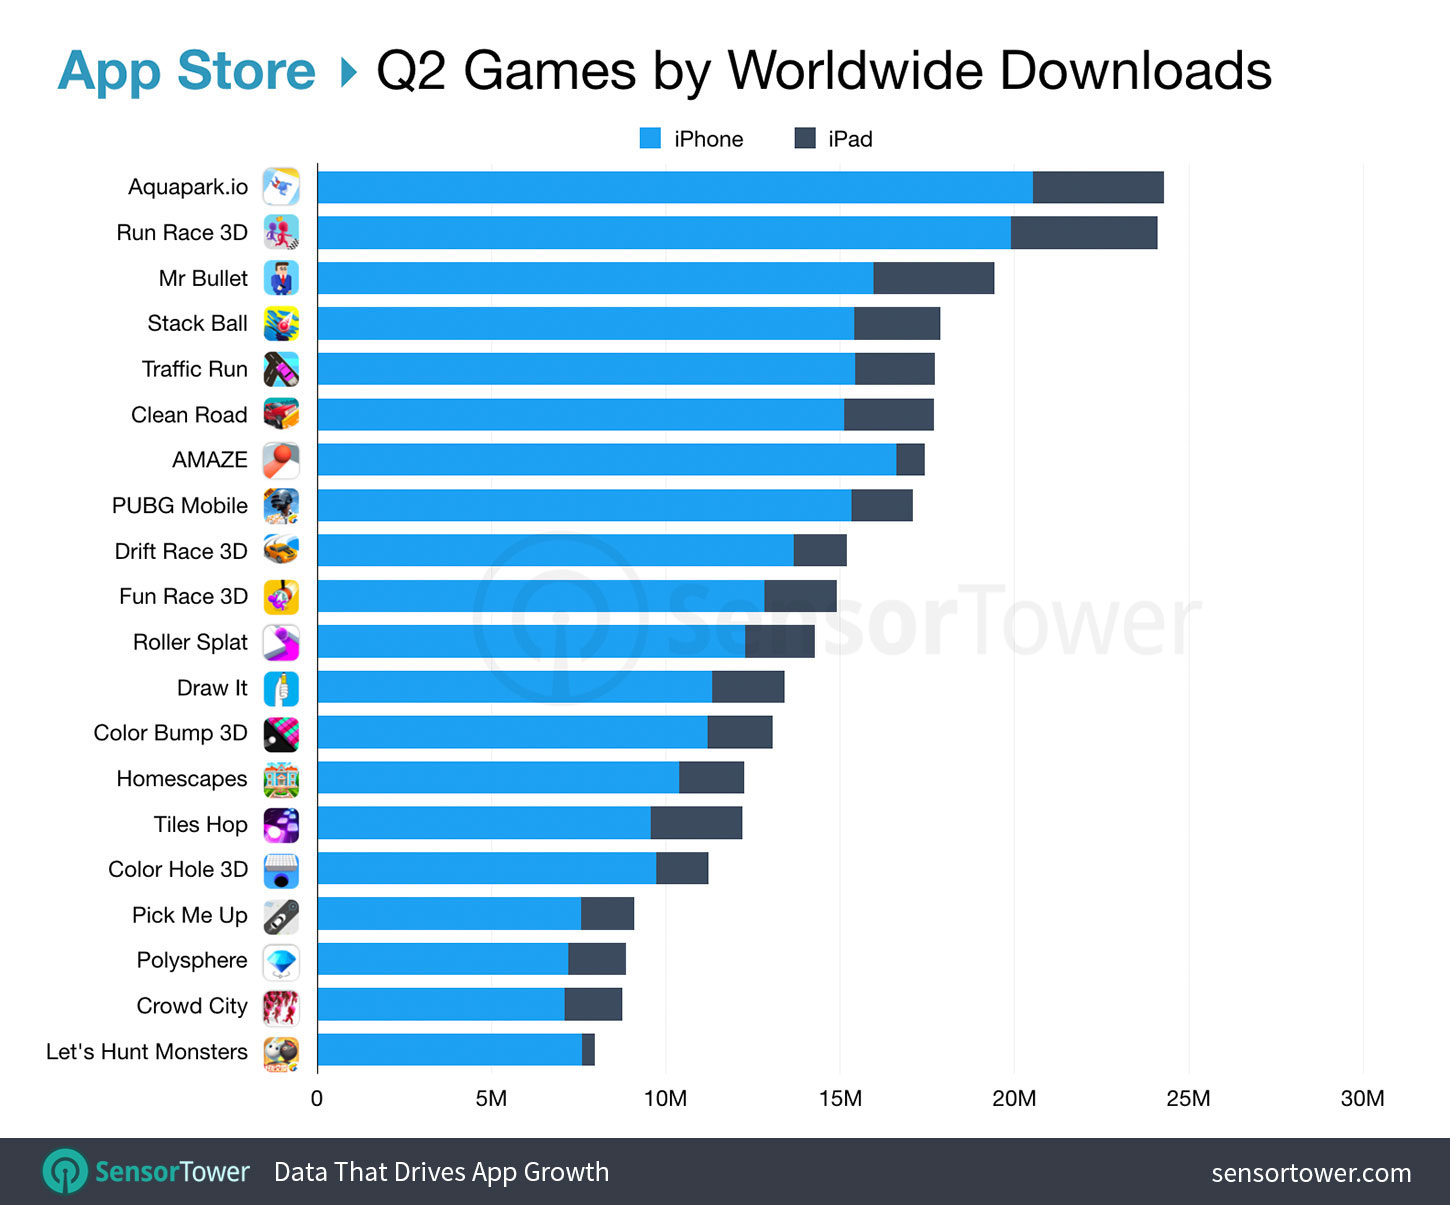 Top App Store Games Worldwide for Q2 2019